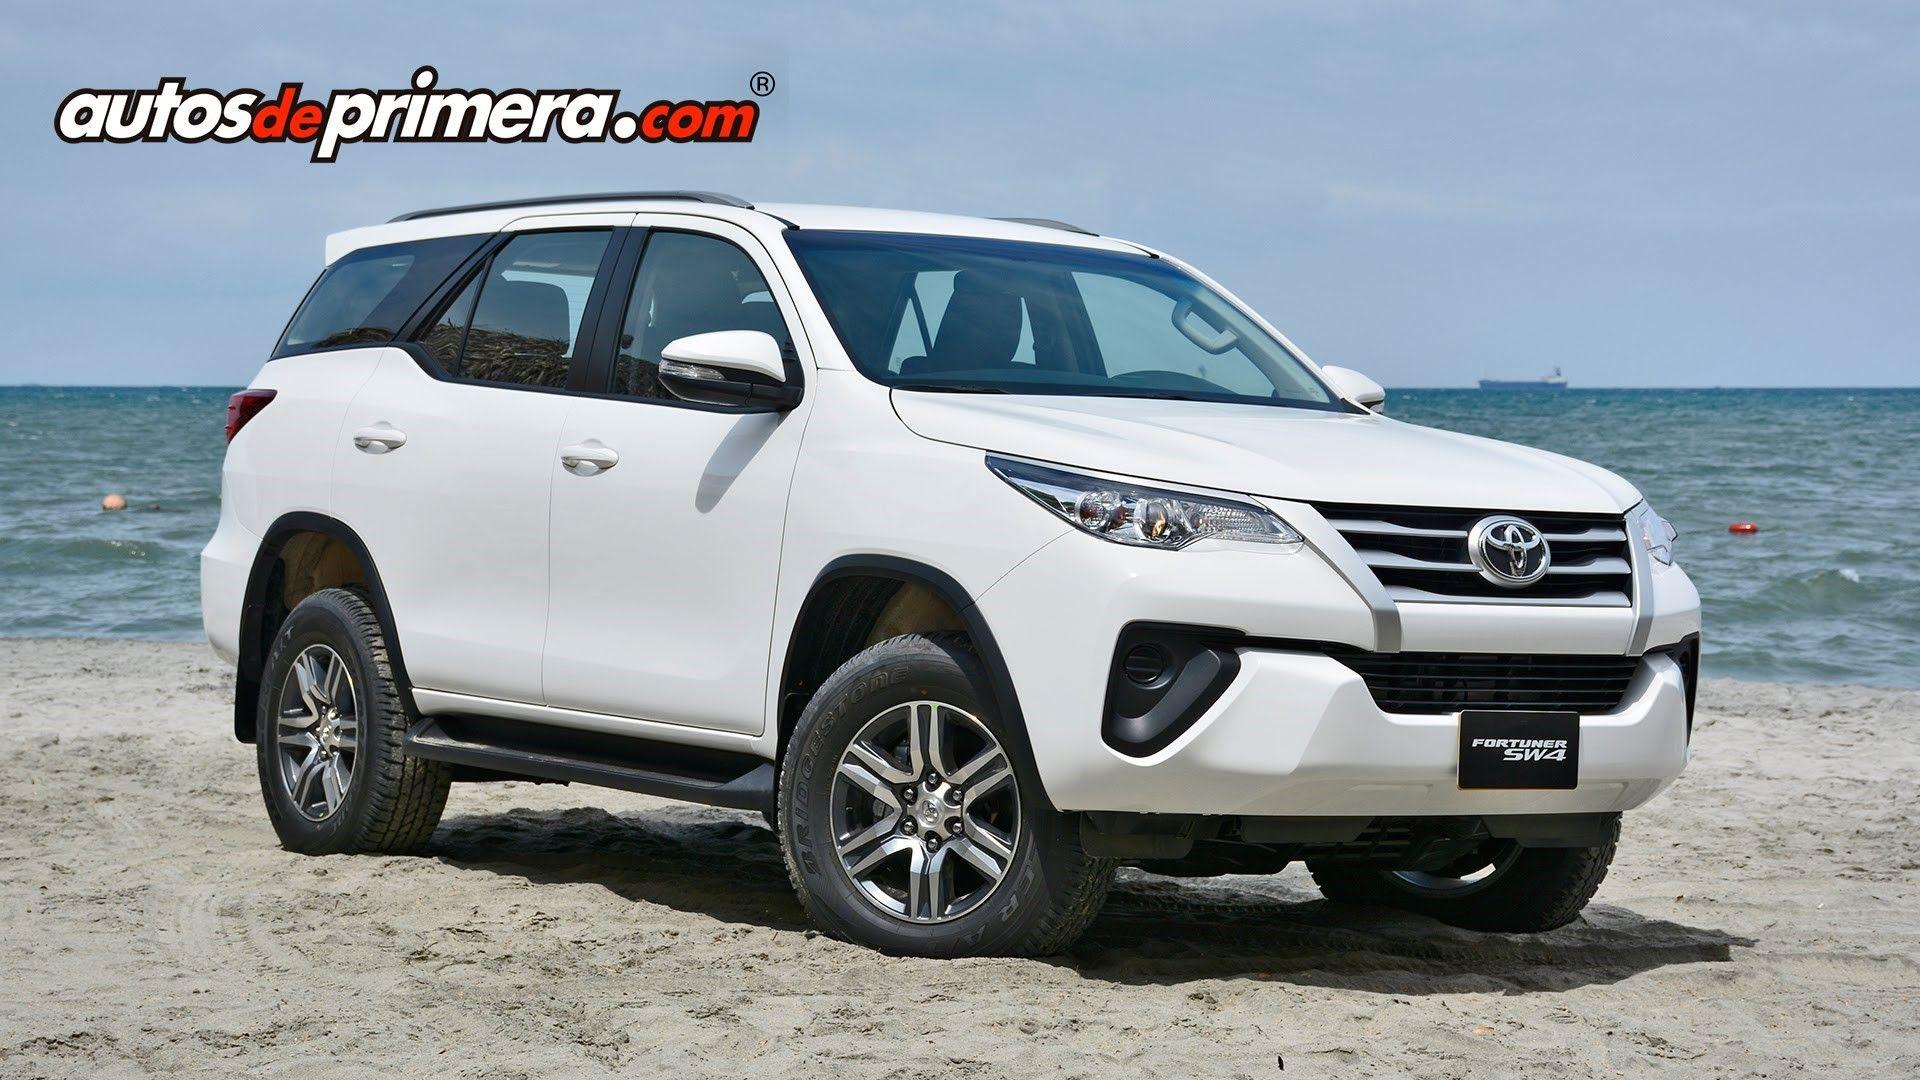 Toyota. Toyota Fortuner 2018: Fortuner Wallpaper Sustainable SF